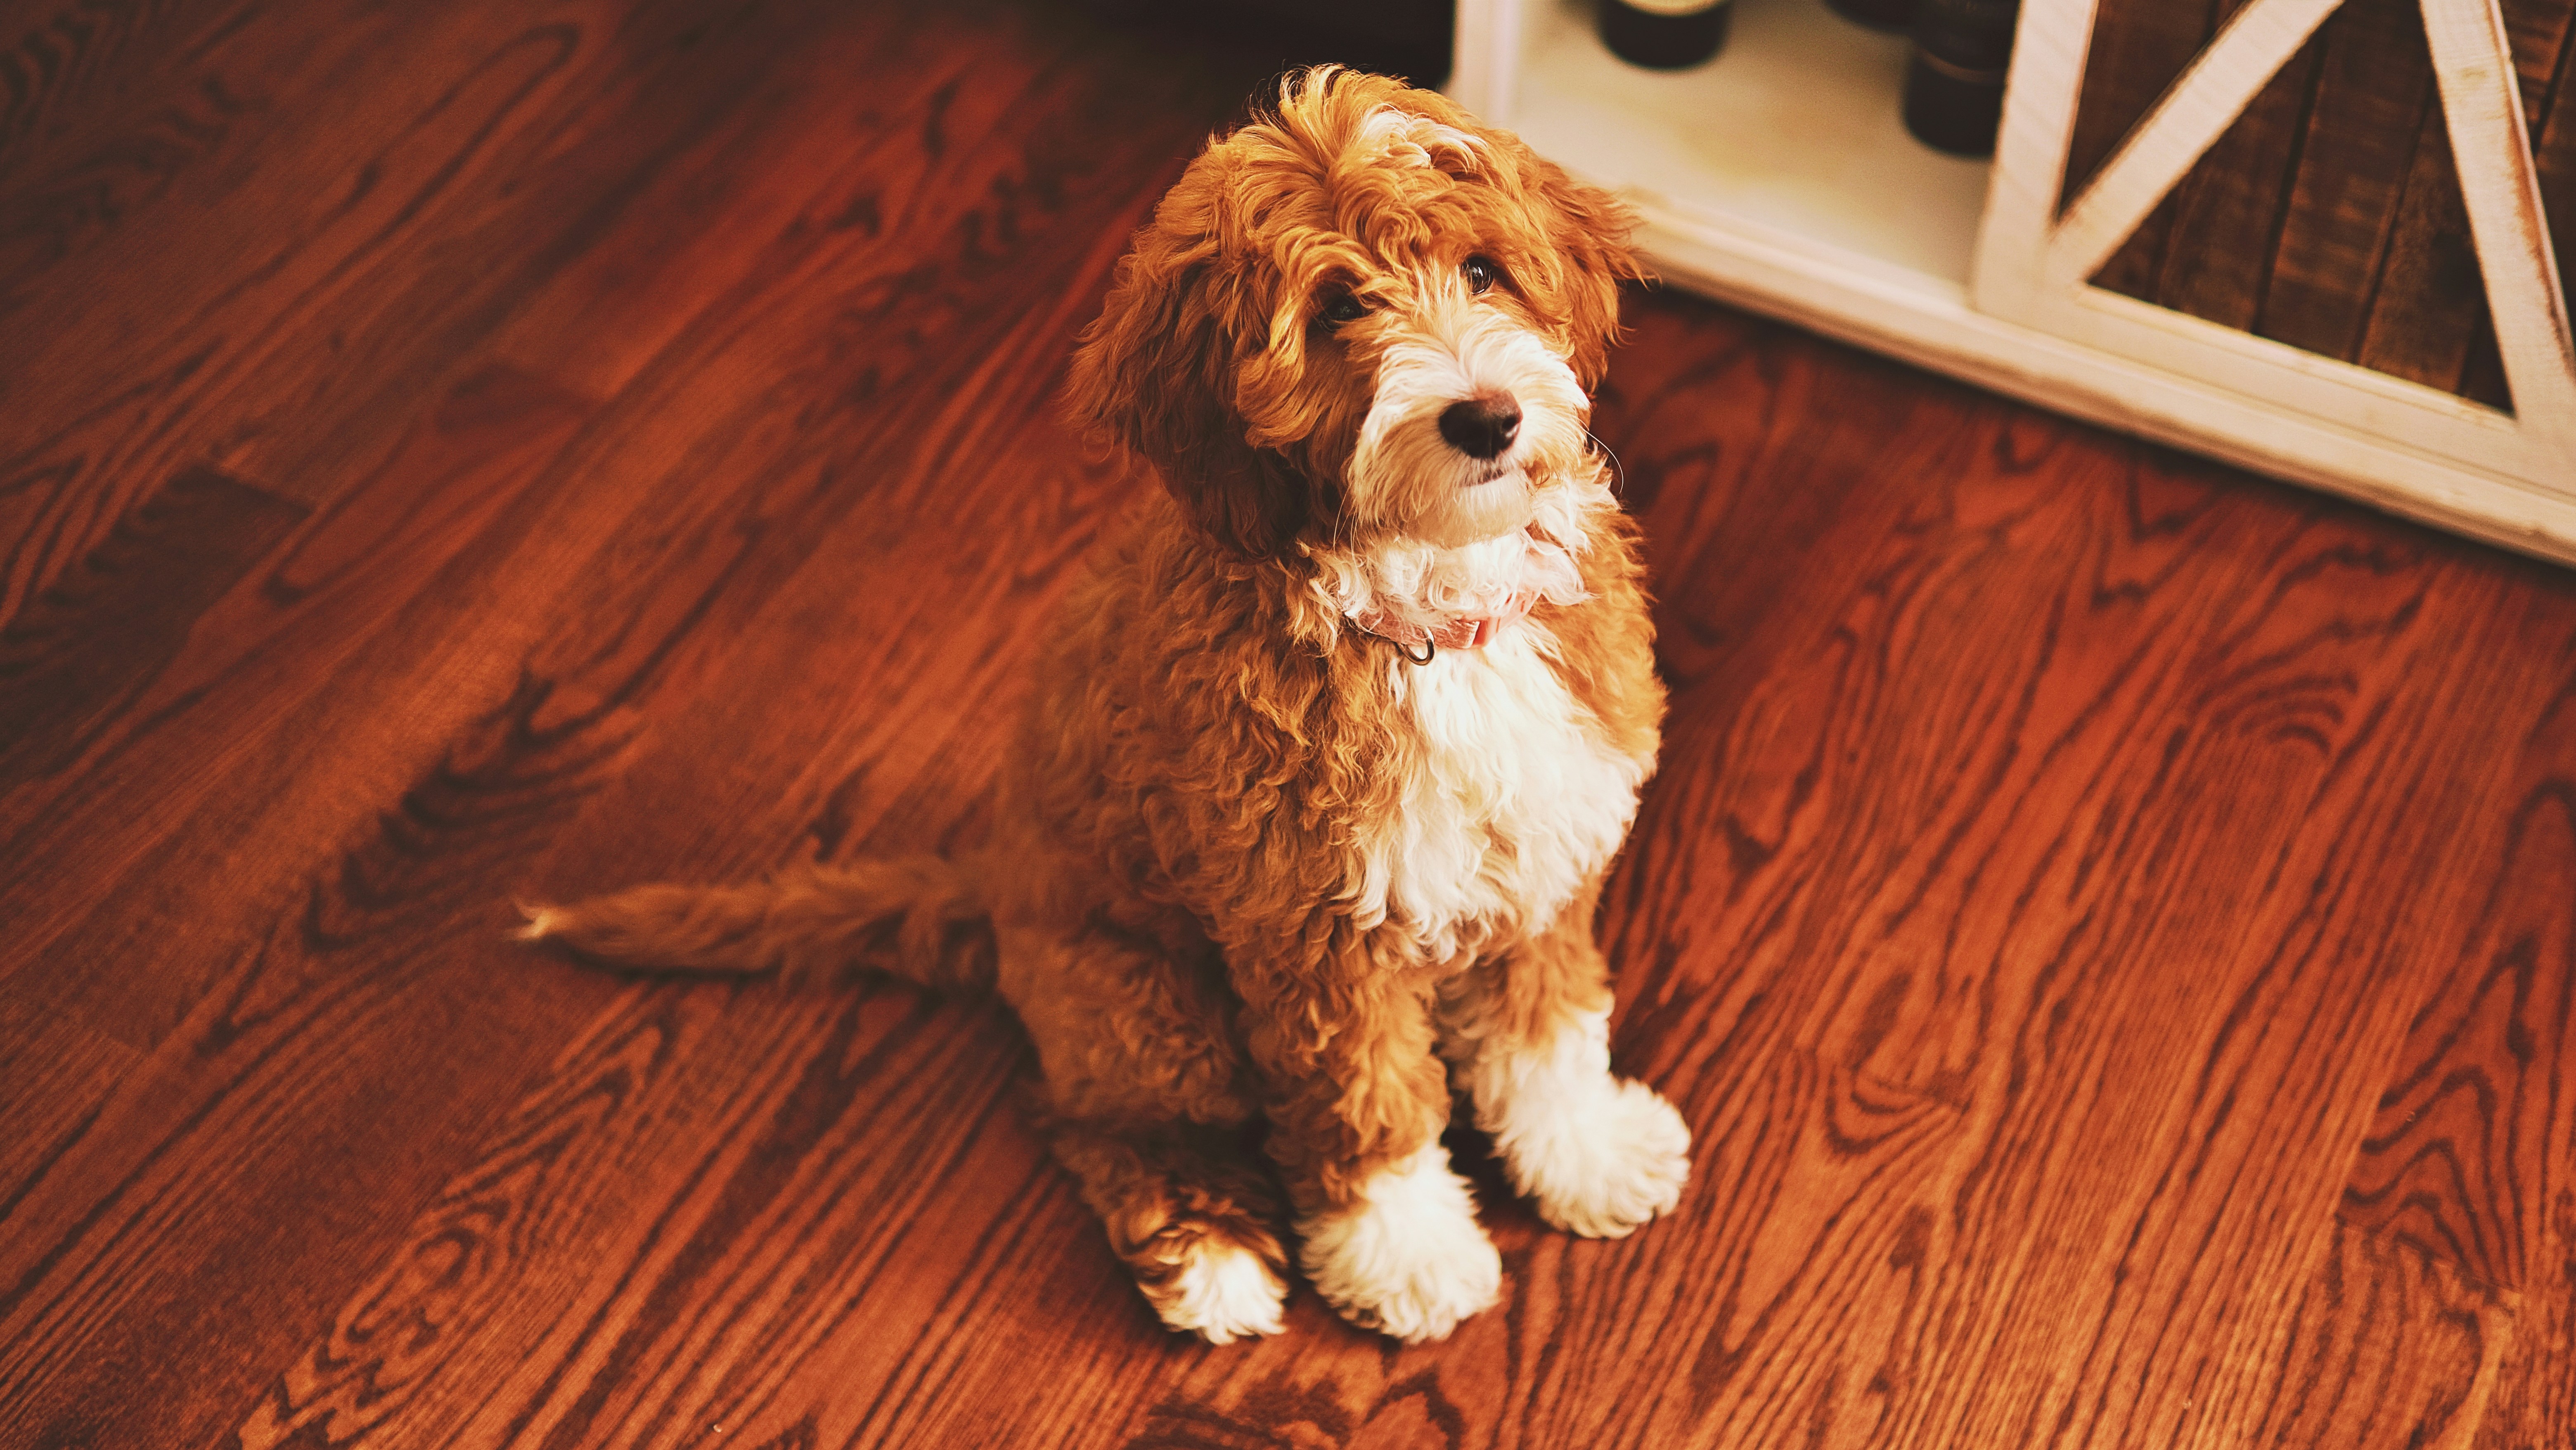 A brown and white goldendoodle sitting attentively.